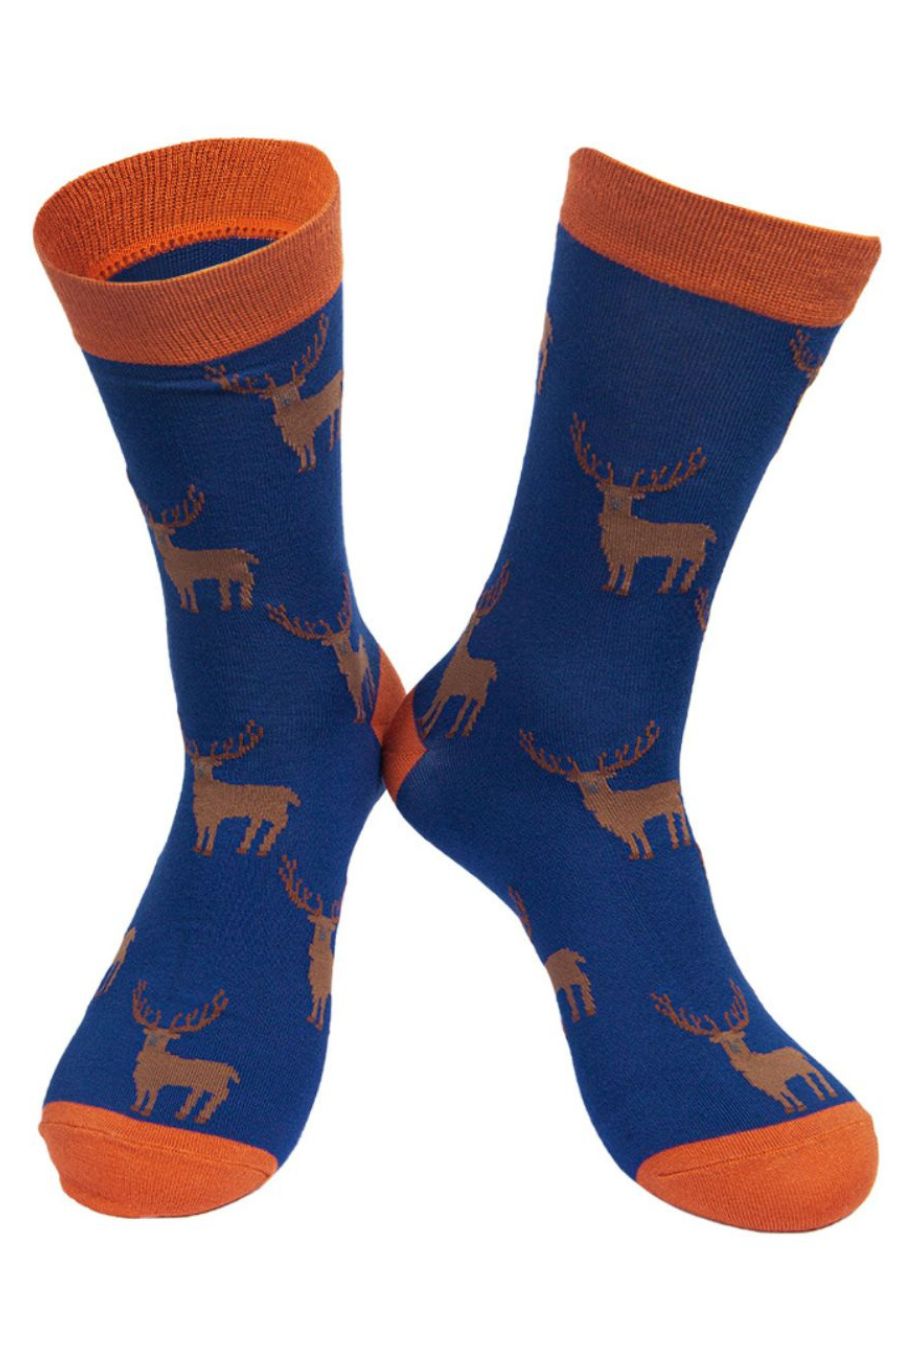 blue and oragne dress socks with all over stag print 